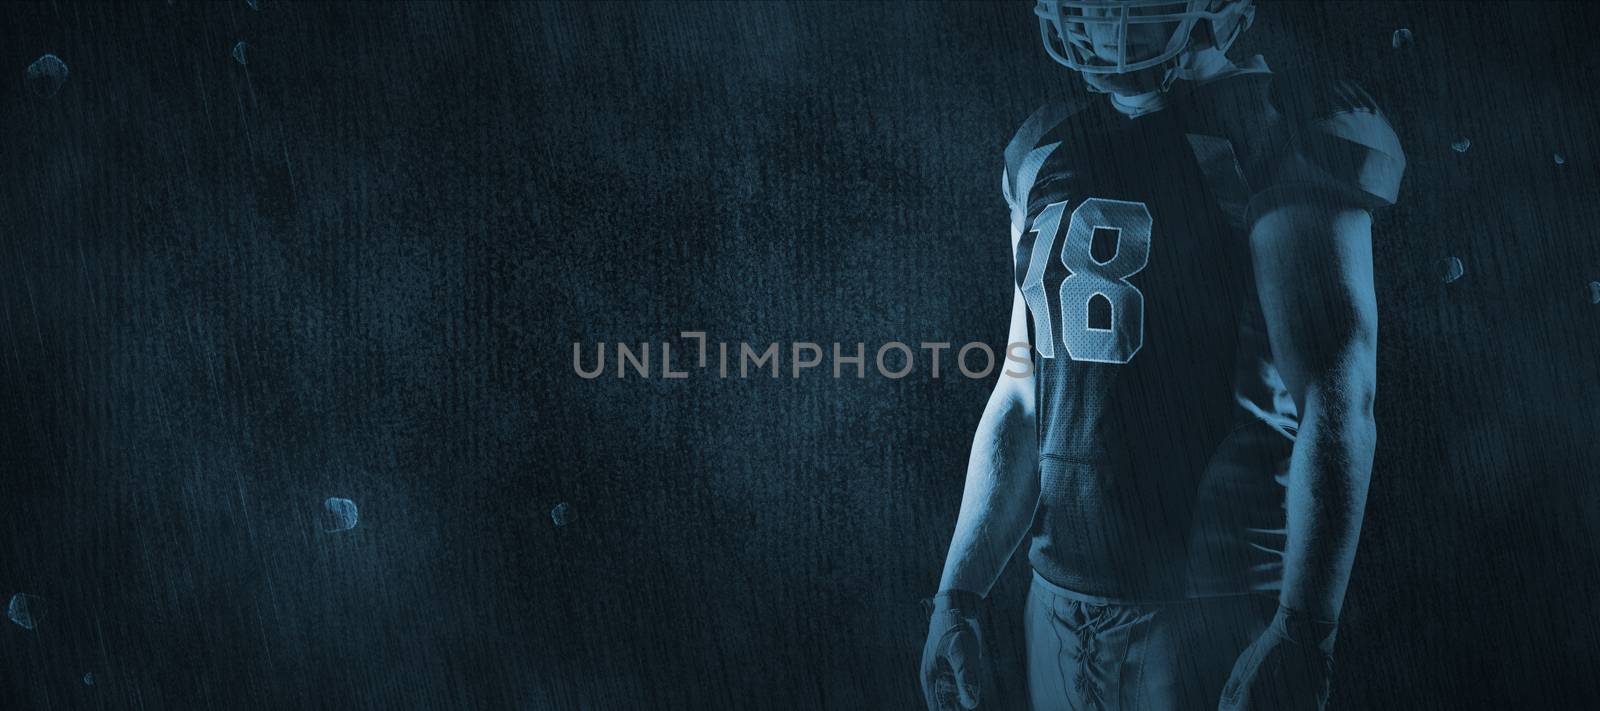 American football player standing with rugby helmet against brown textured background